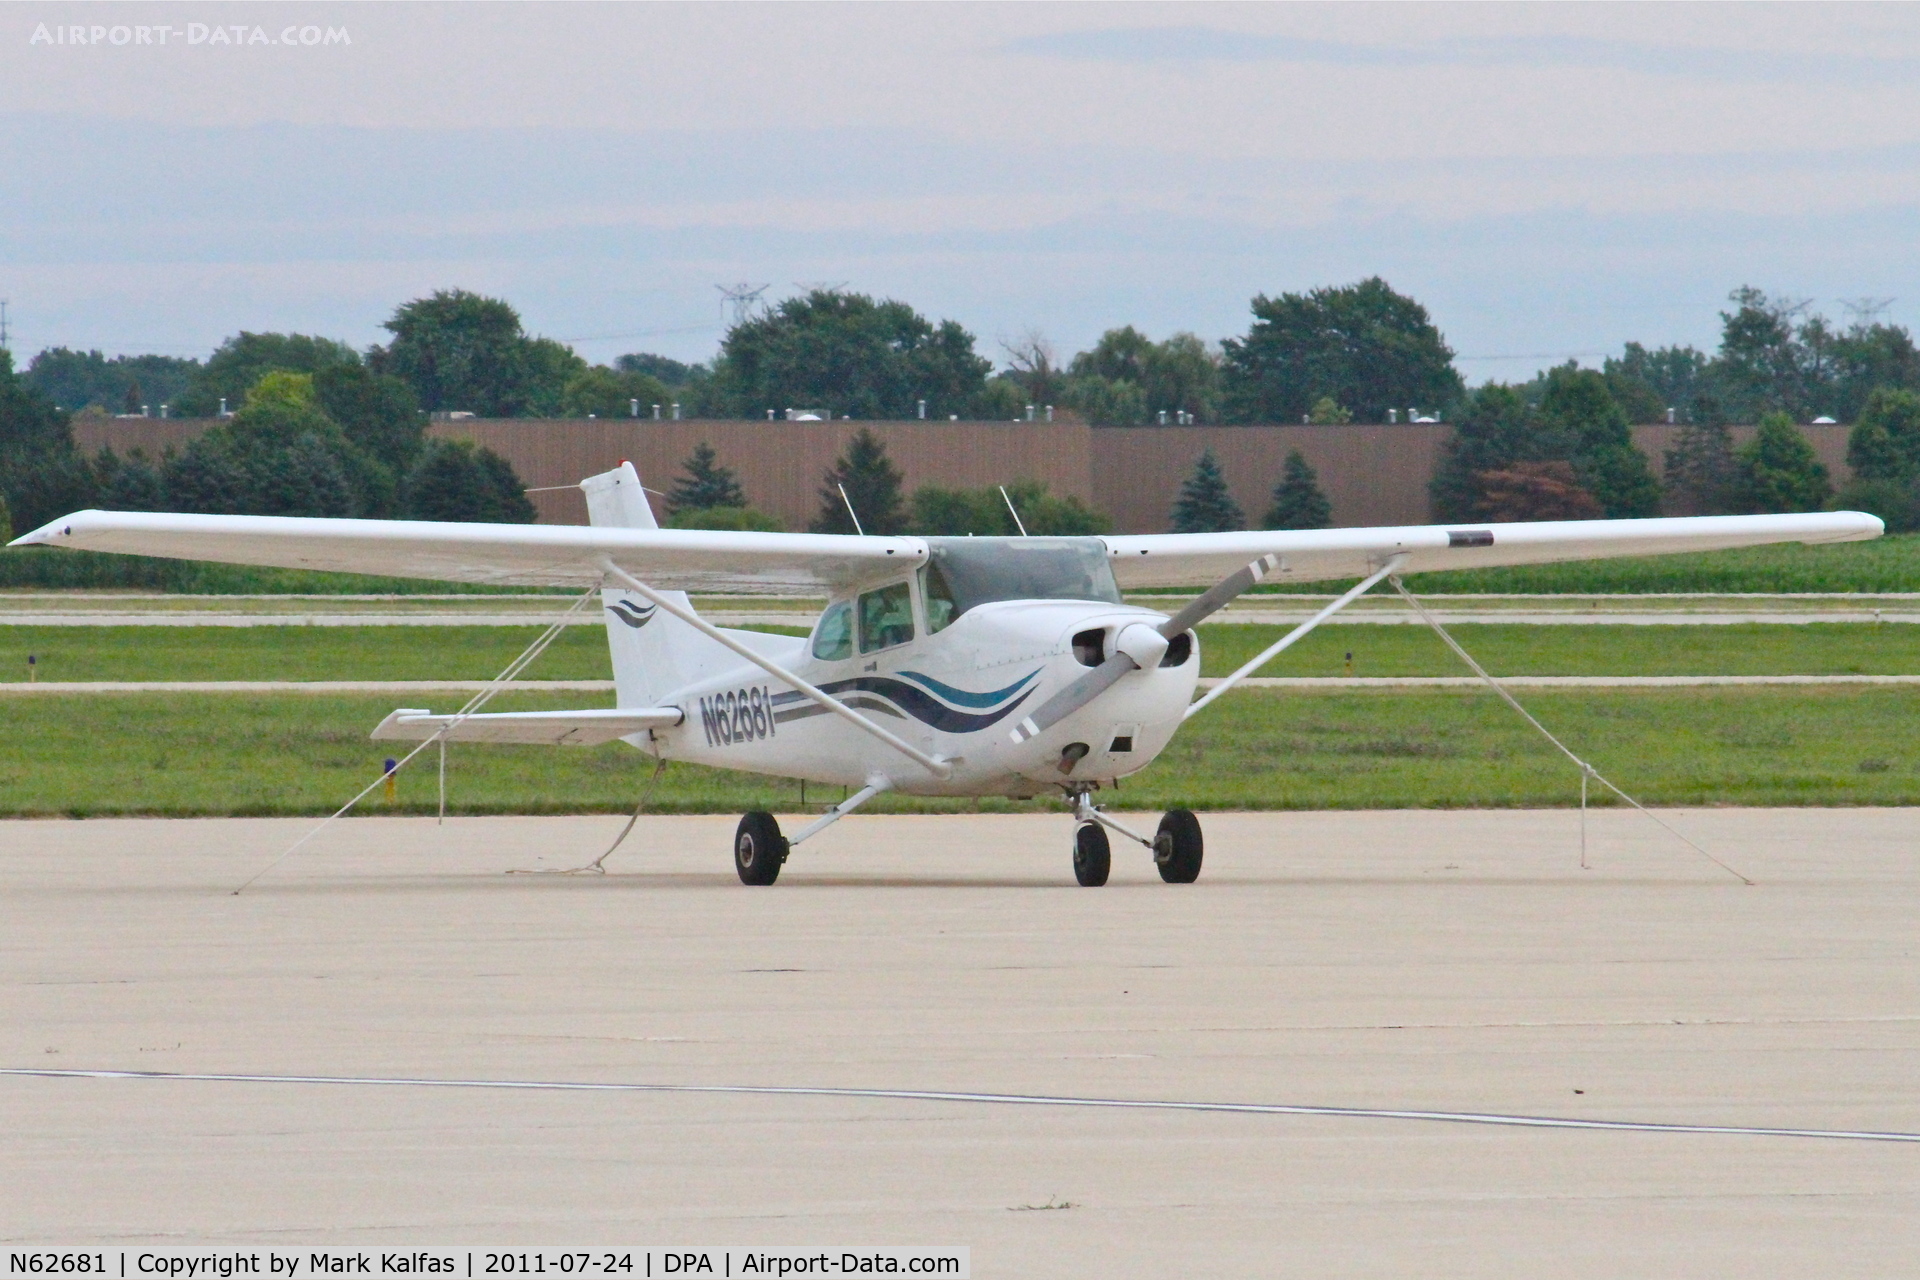 N62681, 1981 Cessna 172P C/N 17275323, Cessna 172P, N62681 on the ramp at DuPage Airport.